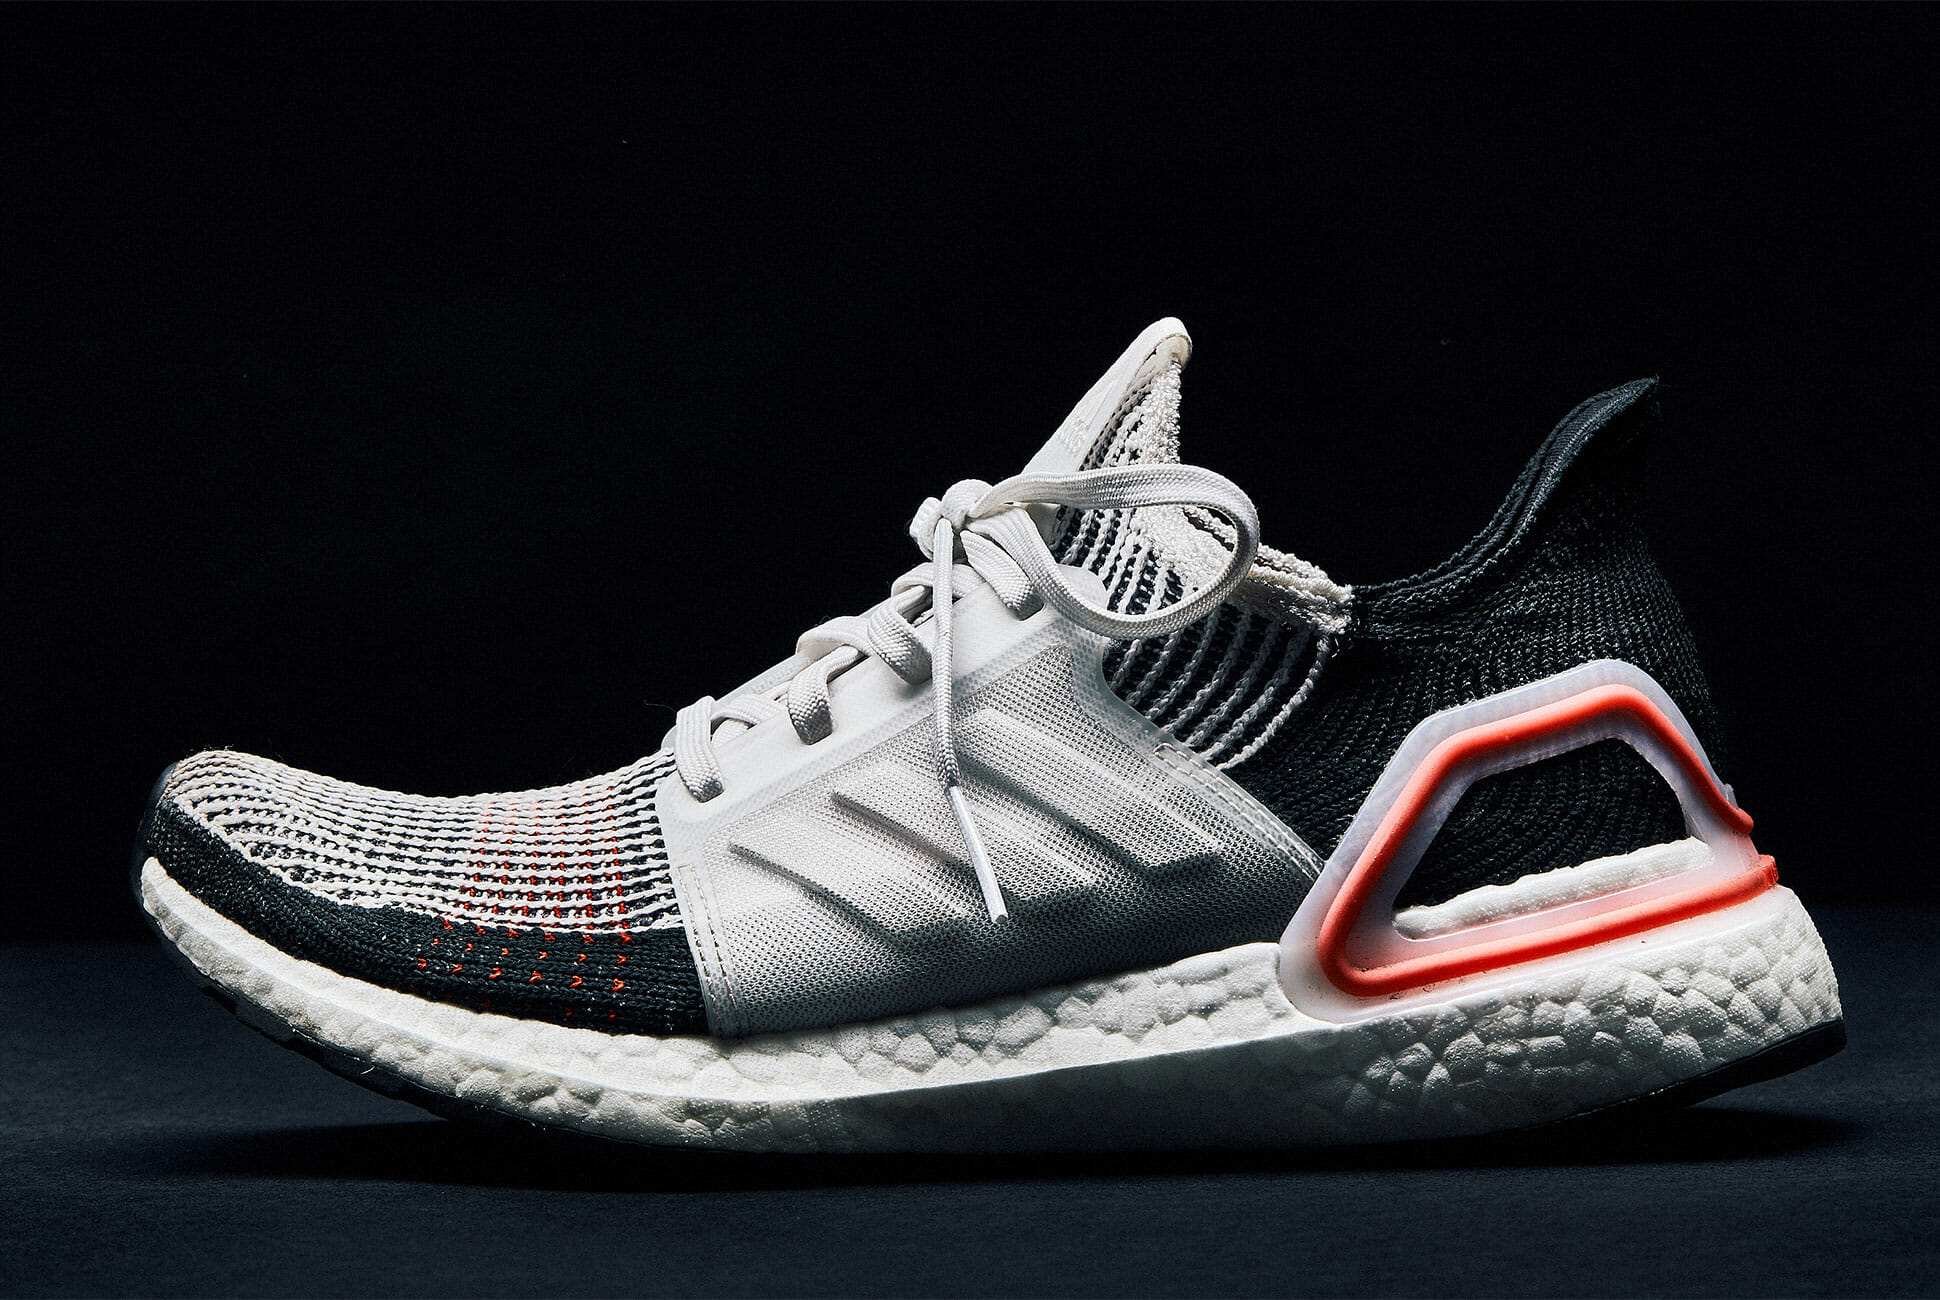 adidas ultra boost review 2019